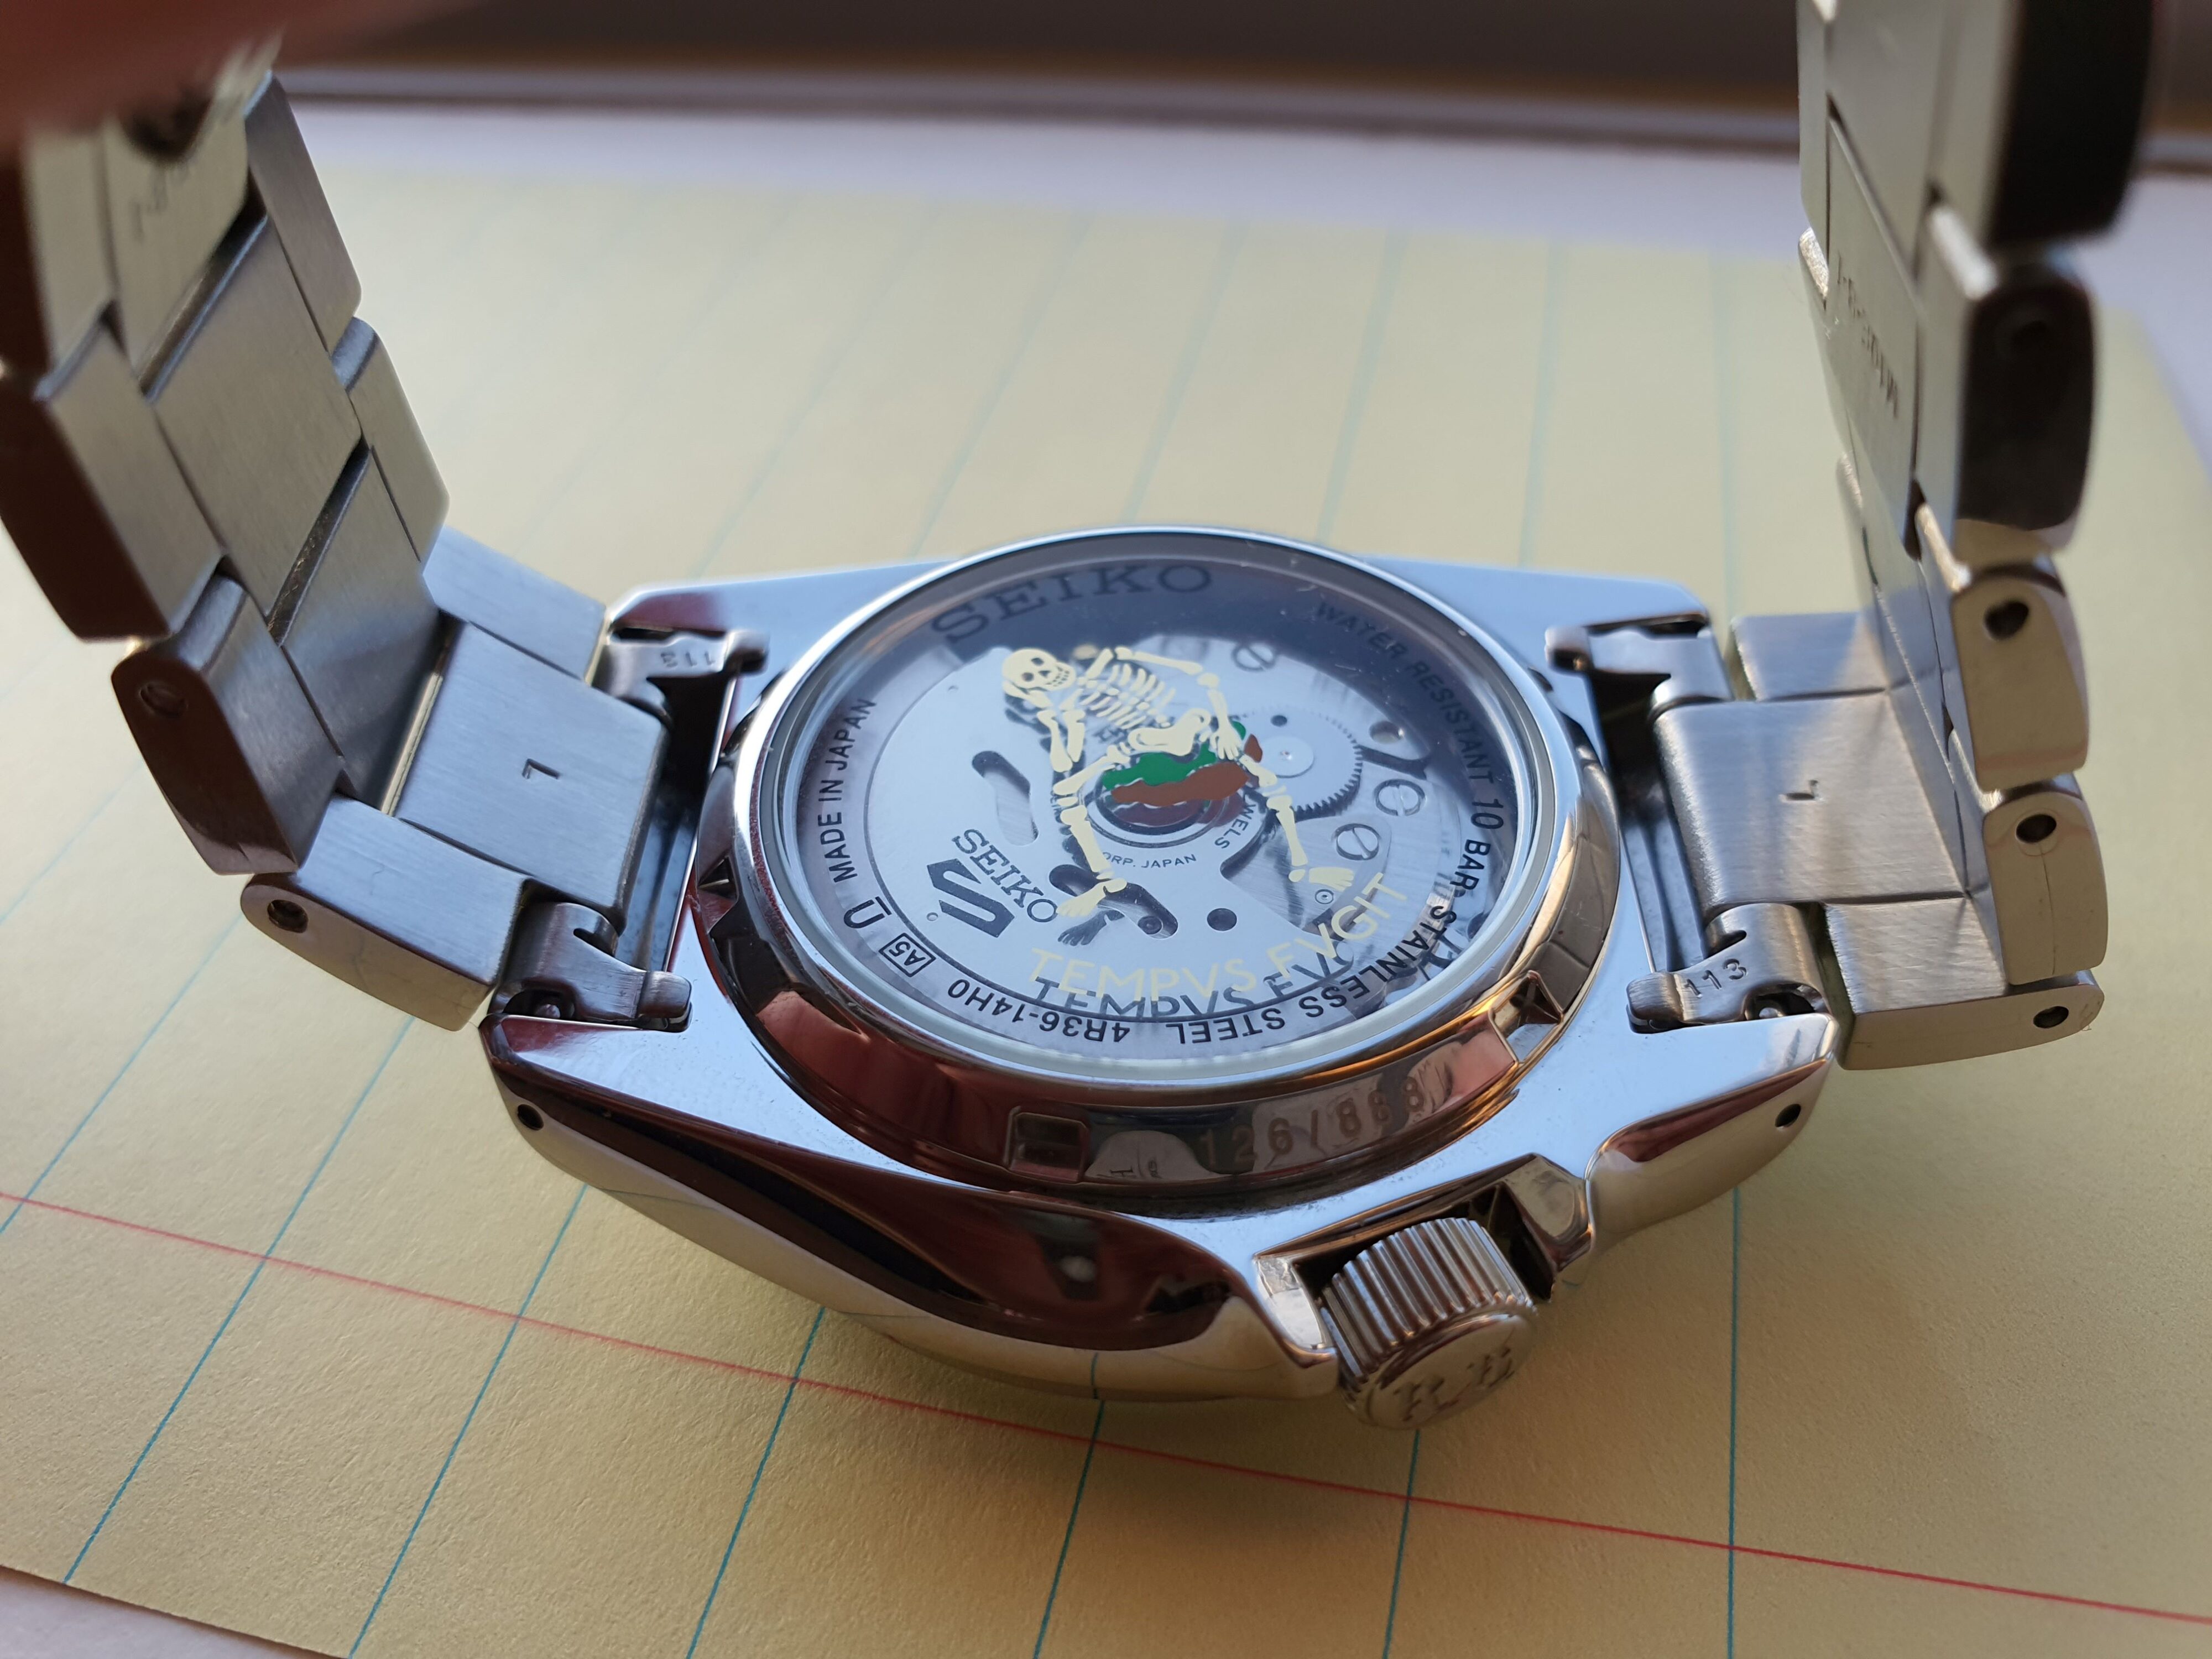 Transparent caseback of the Seiko 5 x Rowing Blazers wristwatch showing the Seiko 4R36A automatic movement and Rowing Blazers' 'TEMPUS FUGIT' emblem